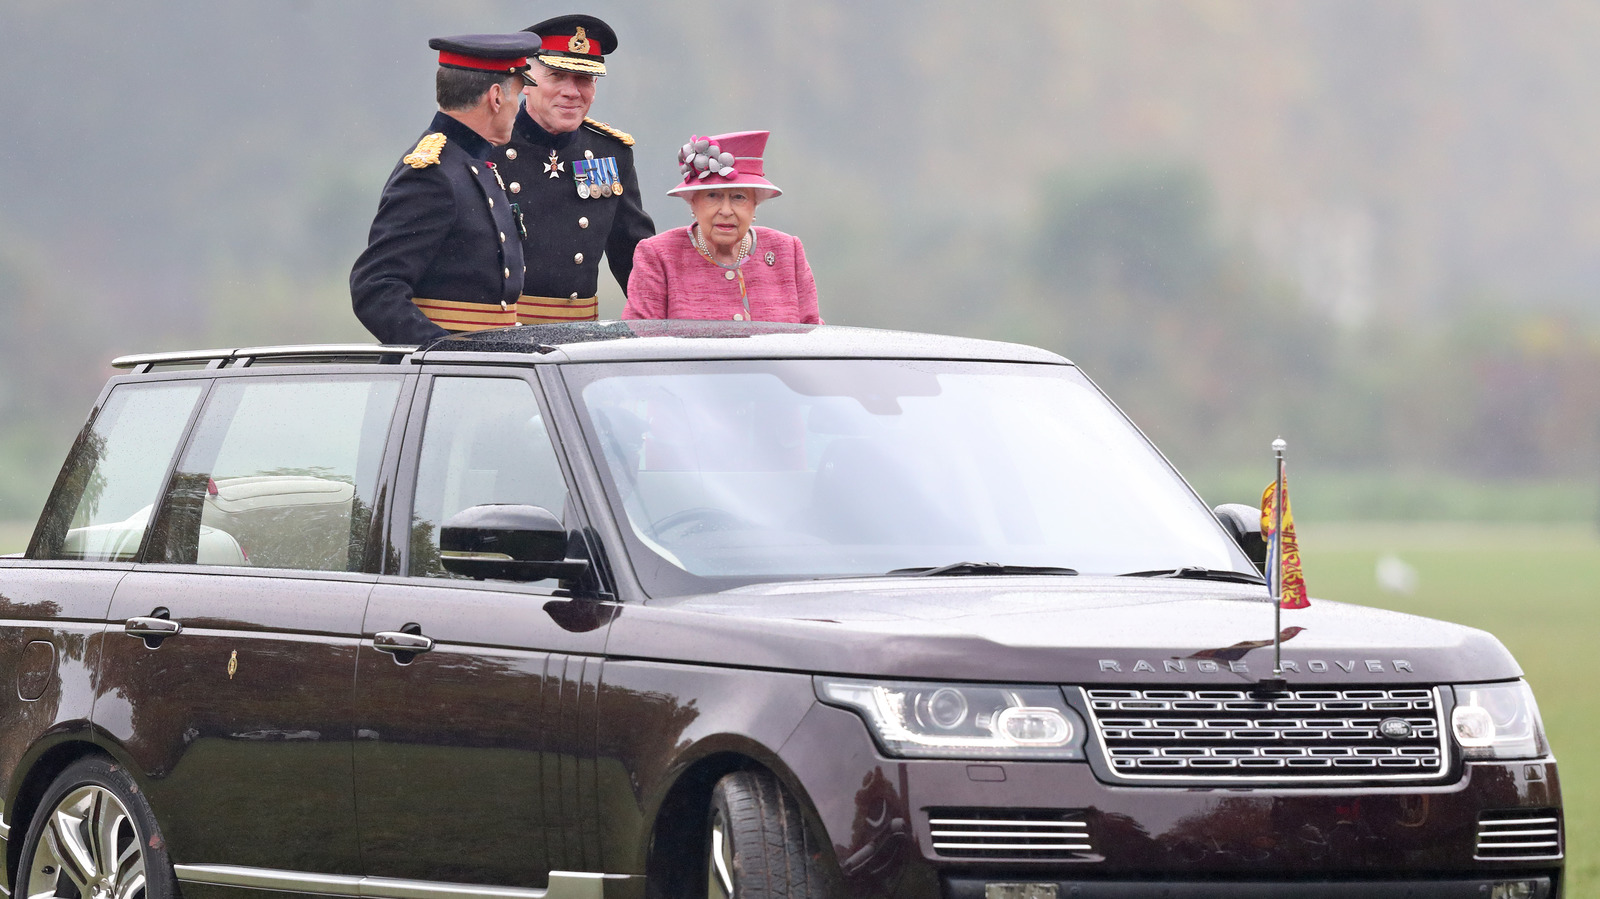 A Look At The Luxury Cars Queen Elizabeth Owns